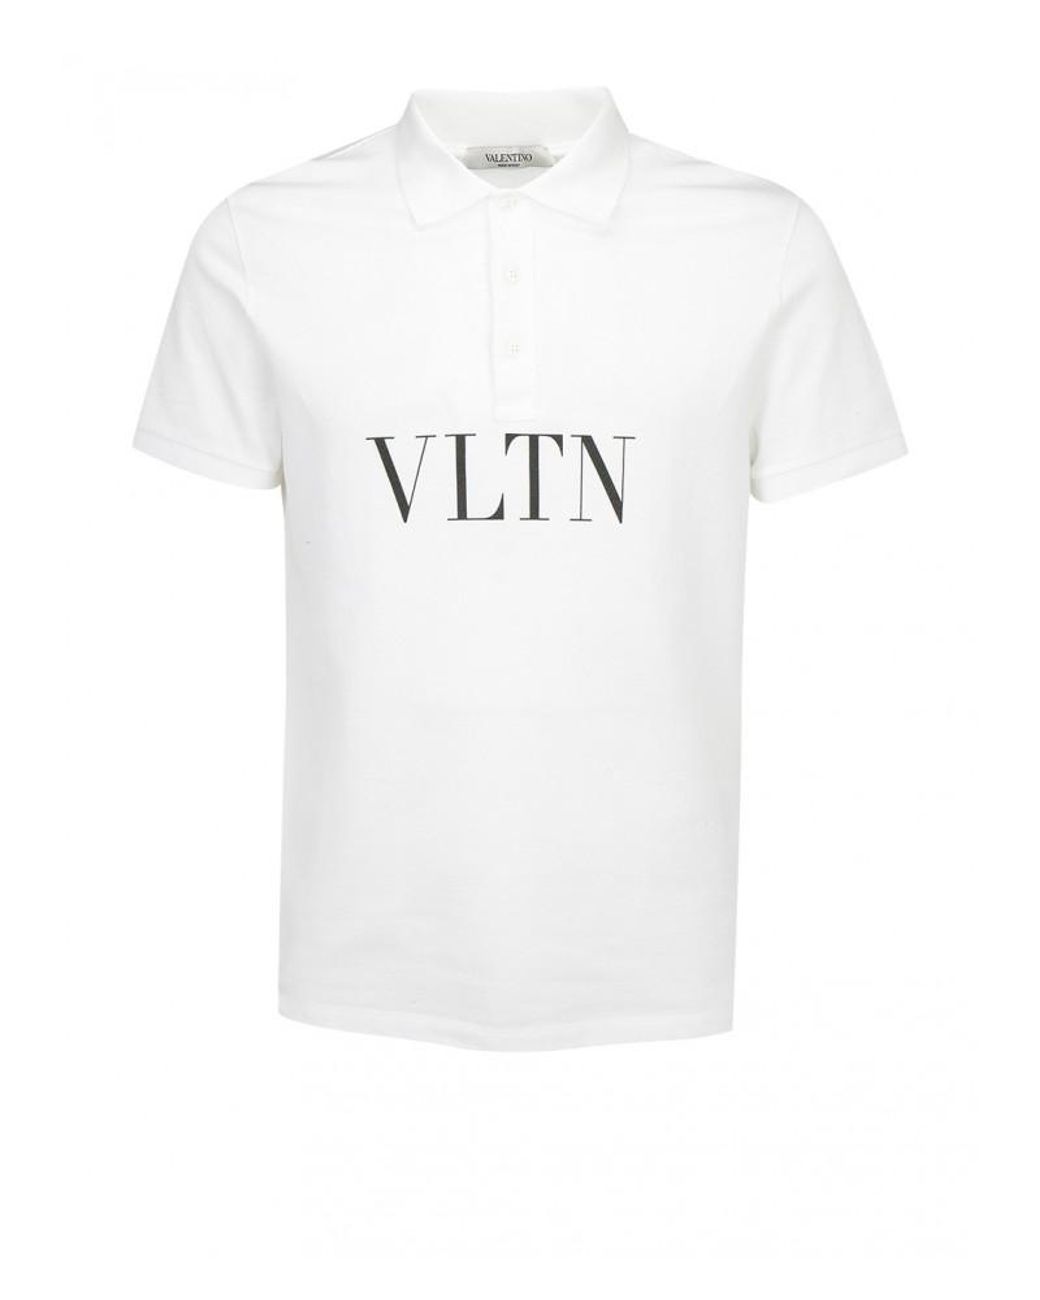 Valentino Cotton Polo Shirt in White for Men - Lyst